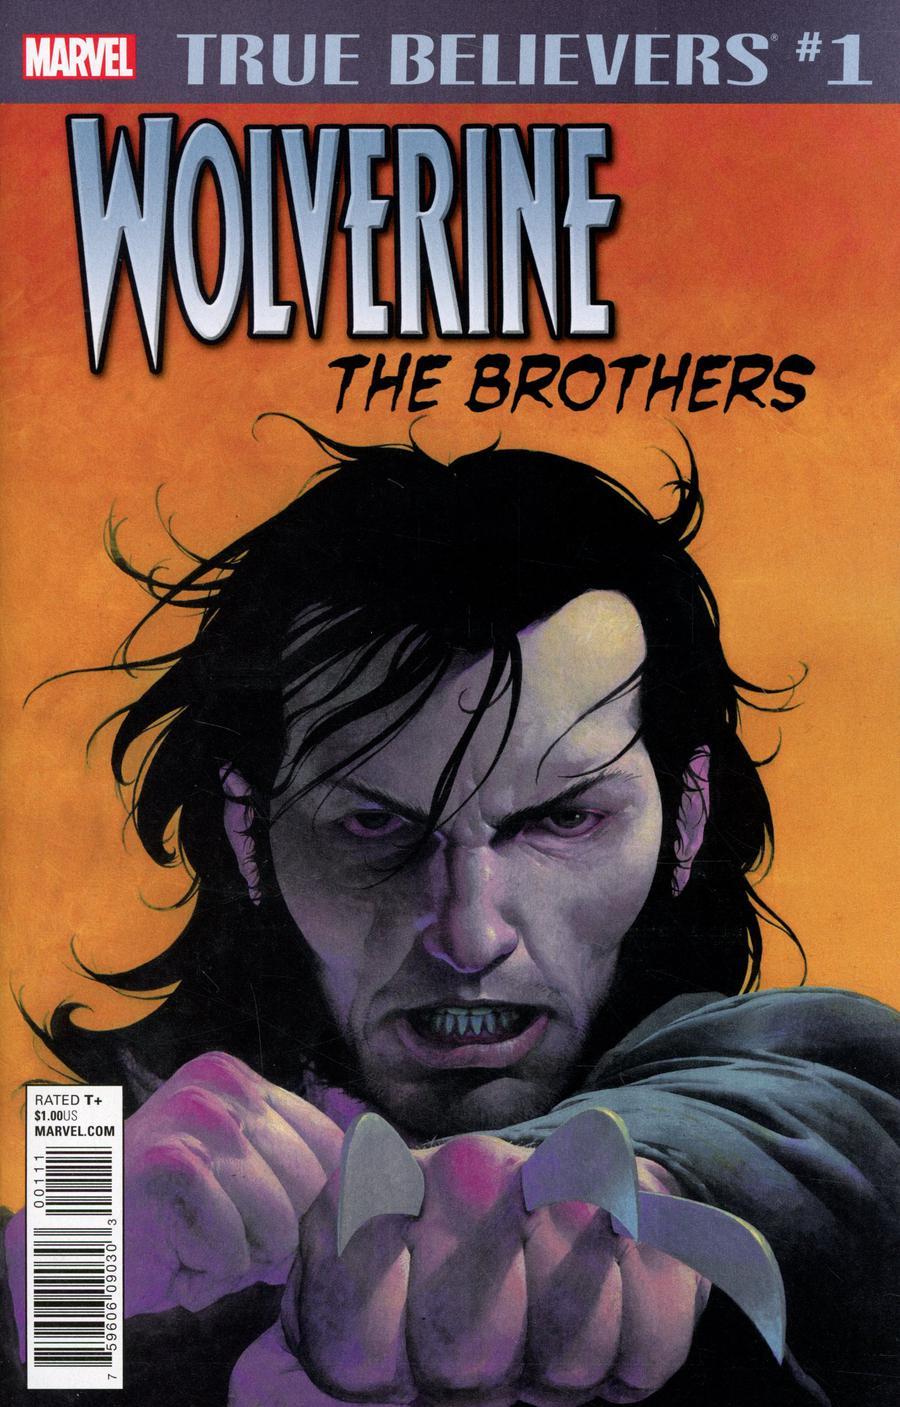 True Believers Wolverine The Brothers Vol. 1 #1